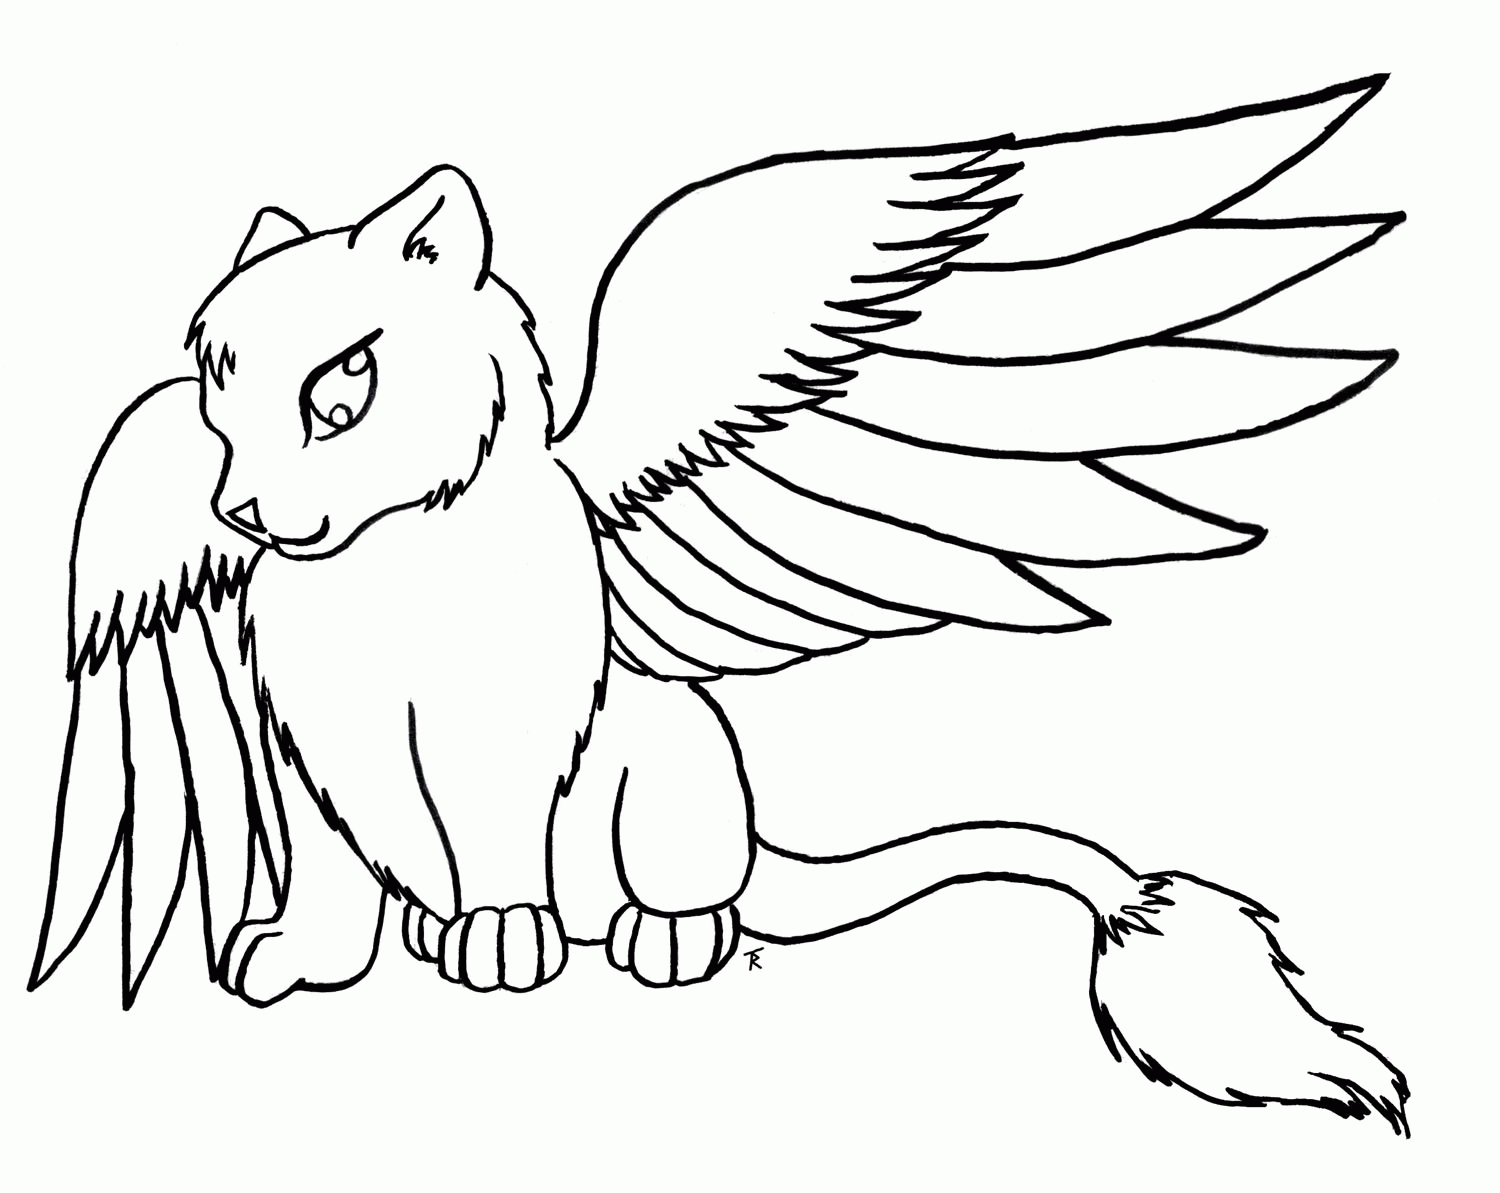 Wolves With Wings Coloring Pages   Coloring Home